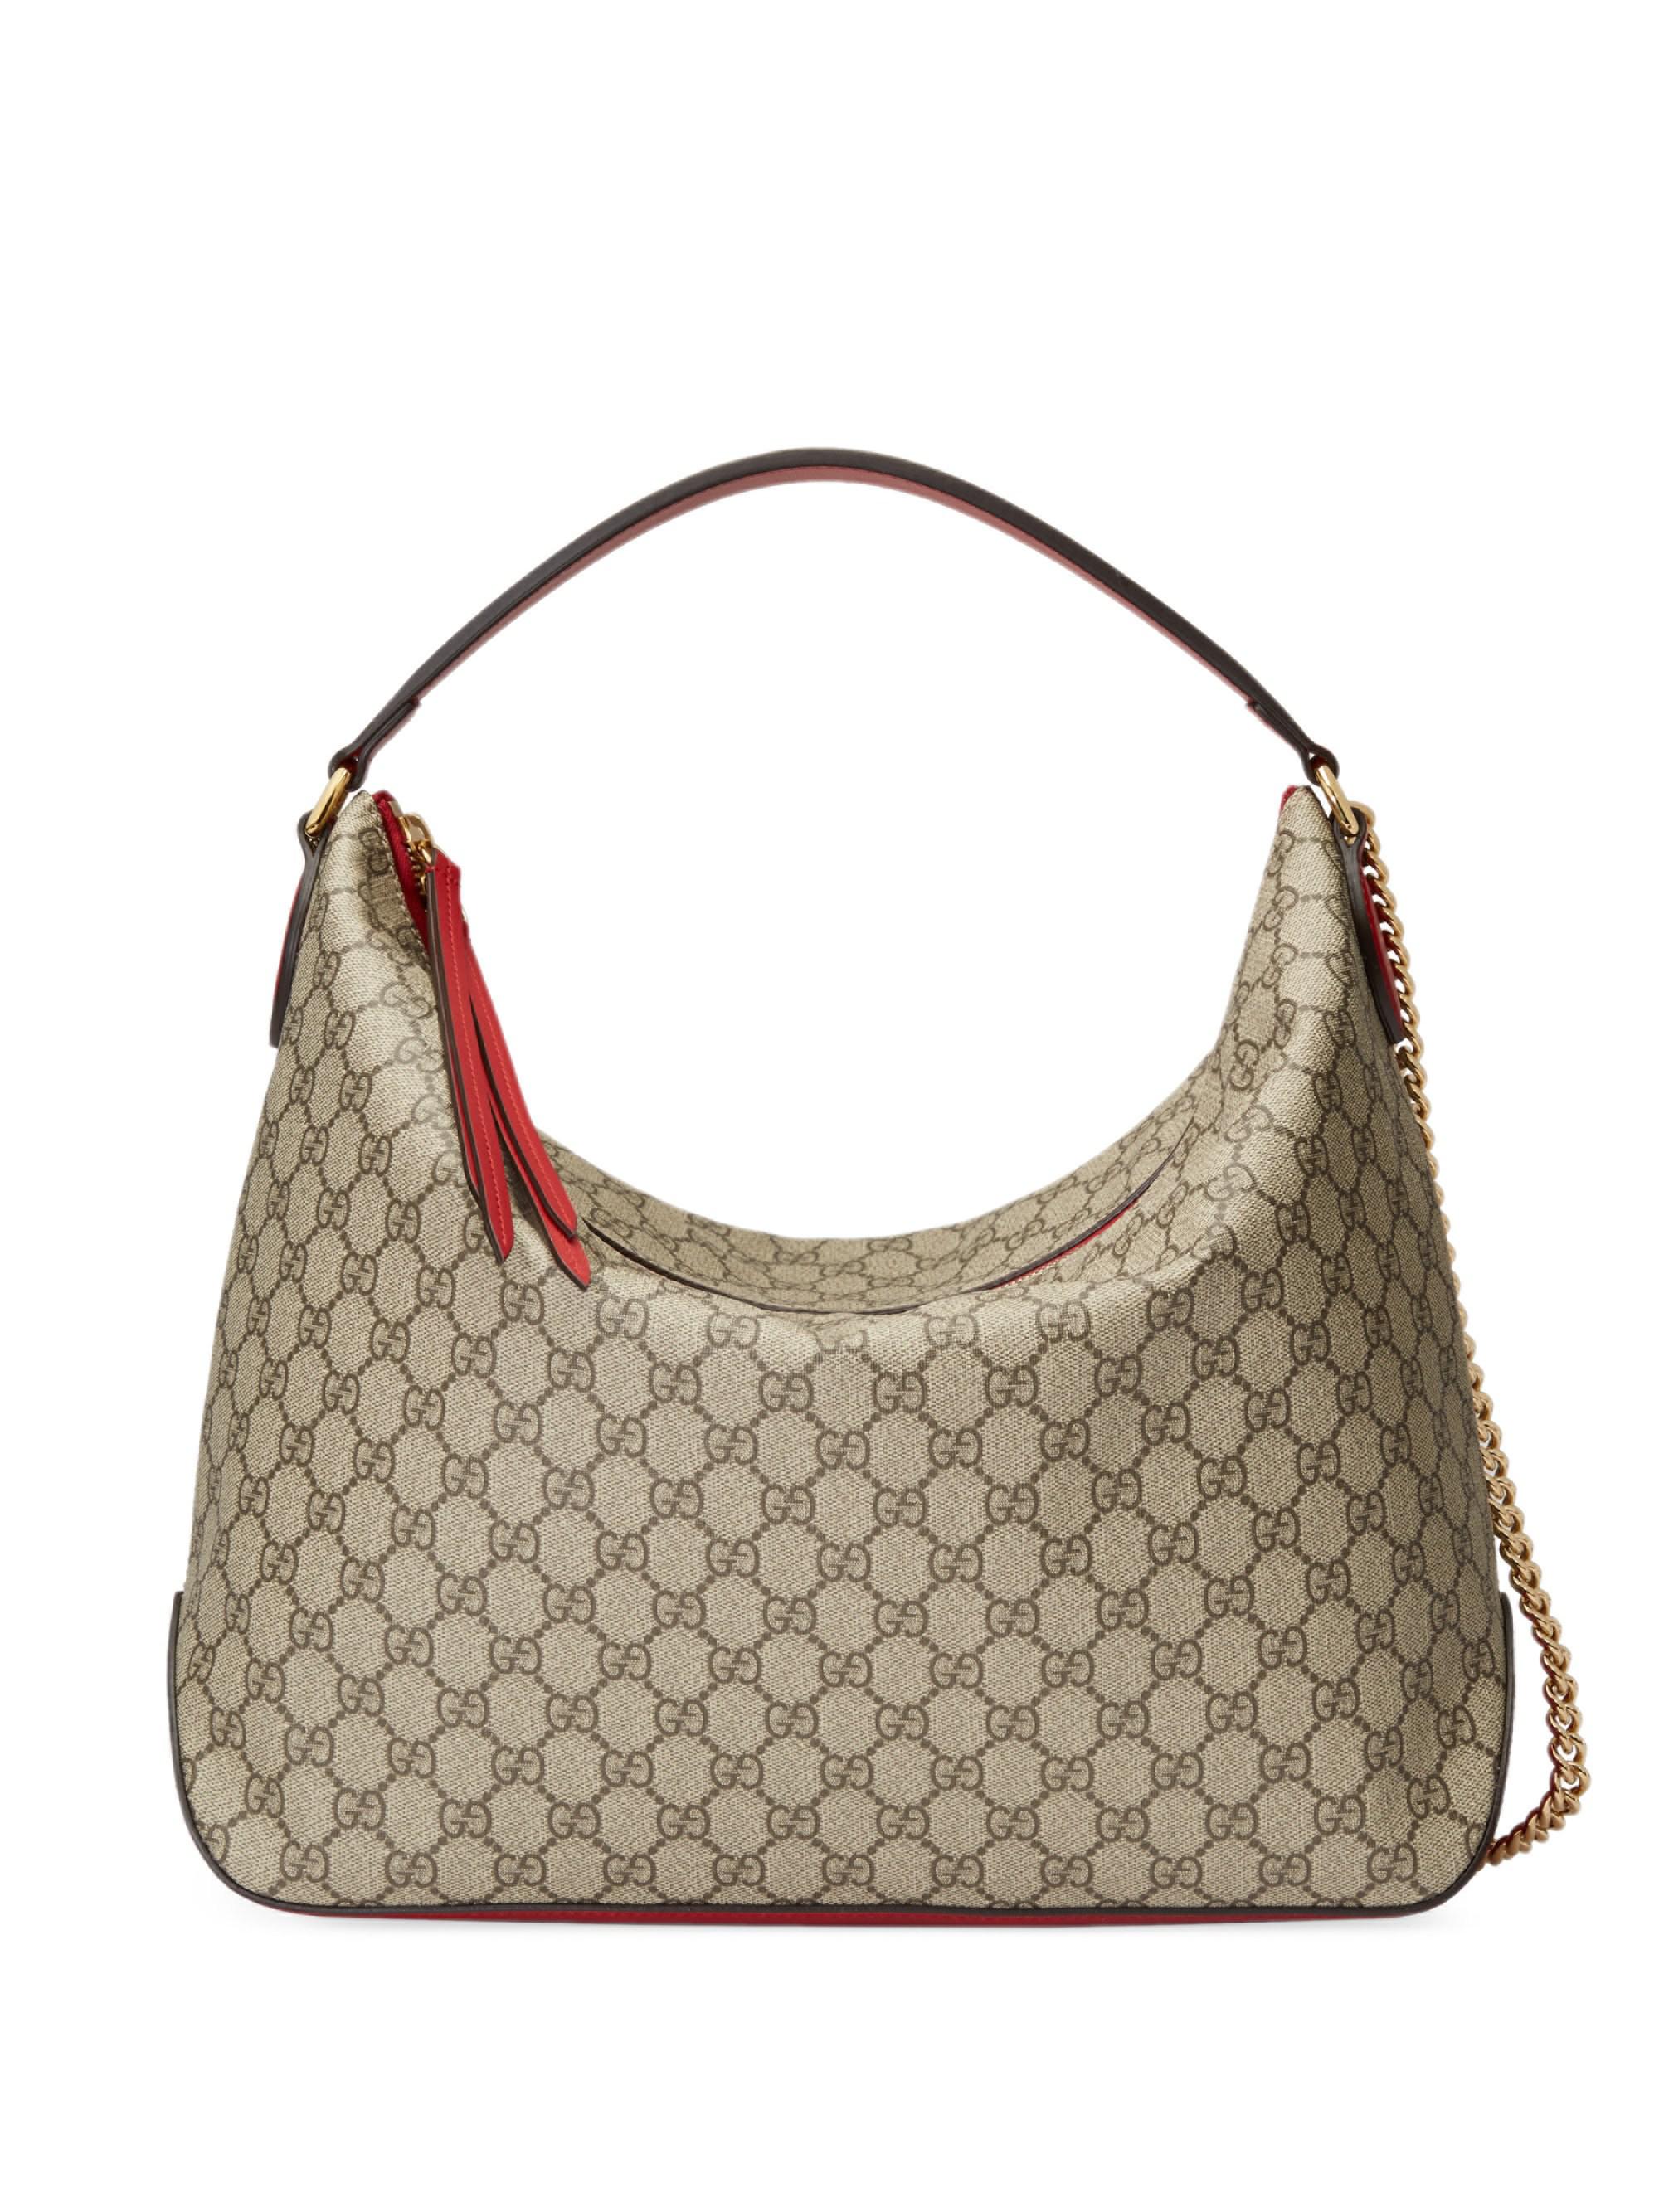 Gucci GG Supreme Canvas Hobo Bag in Natural Lyst